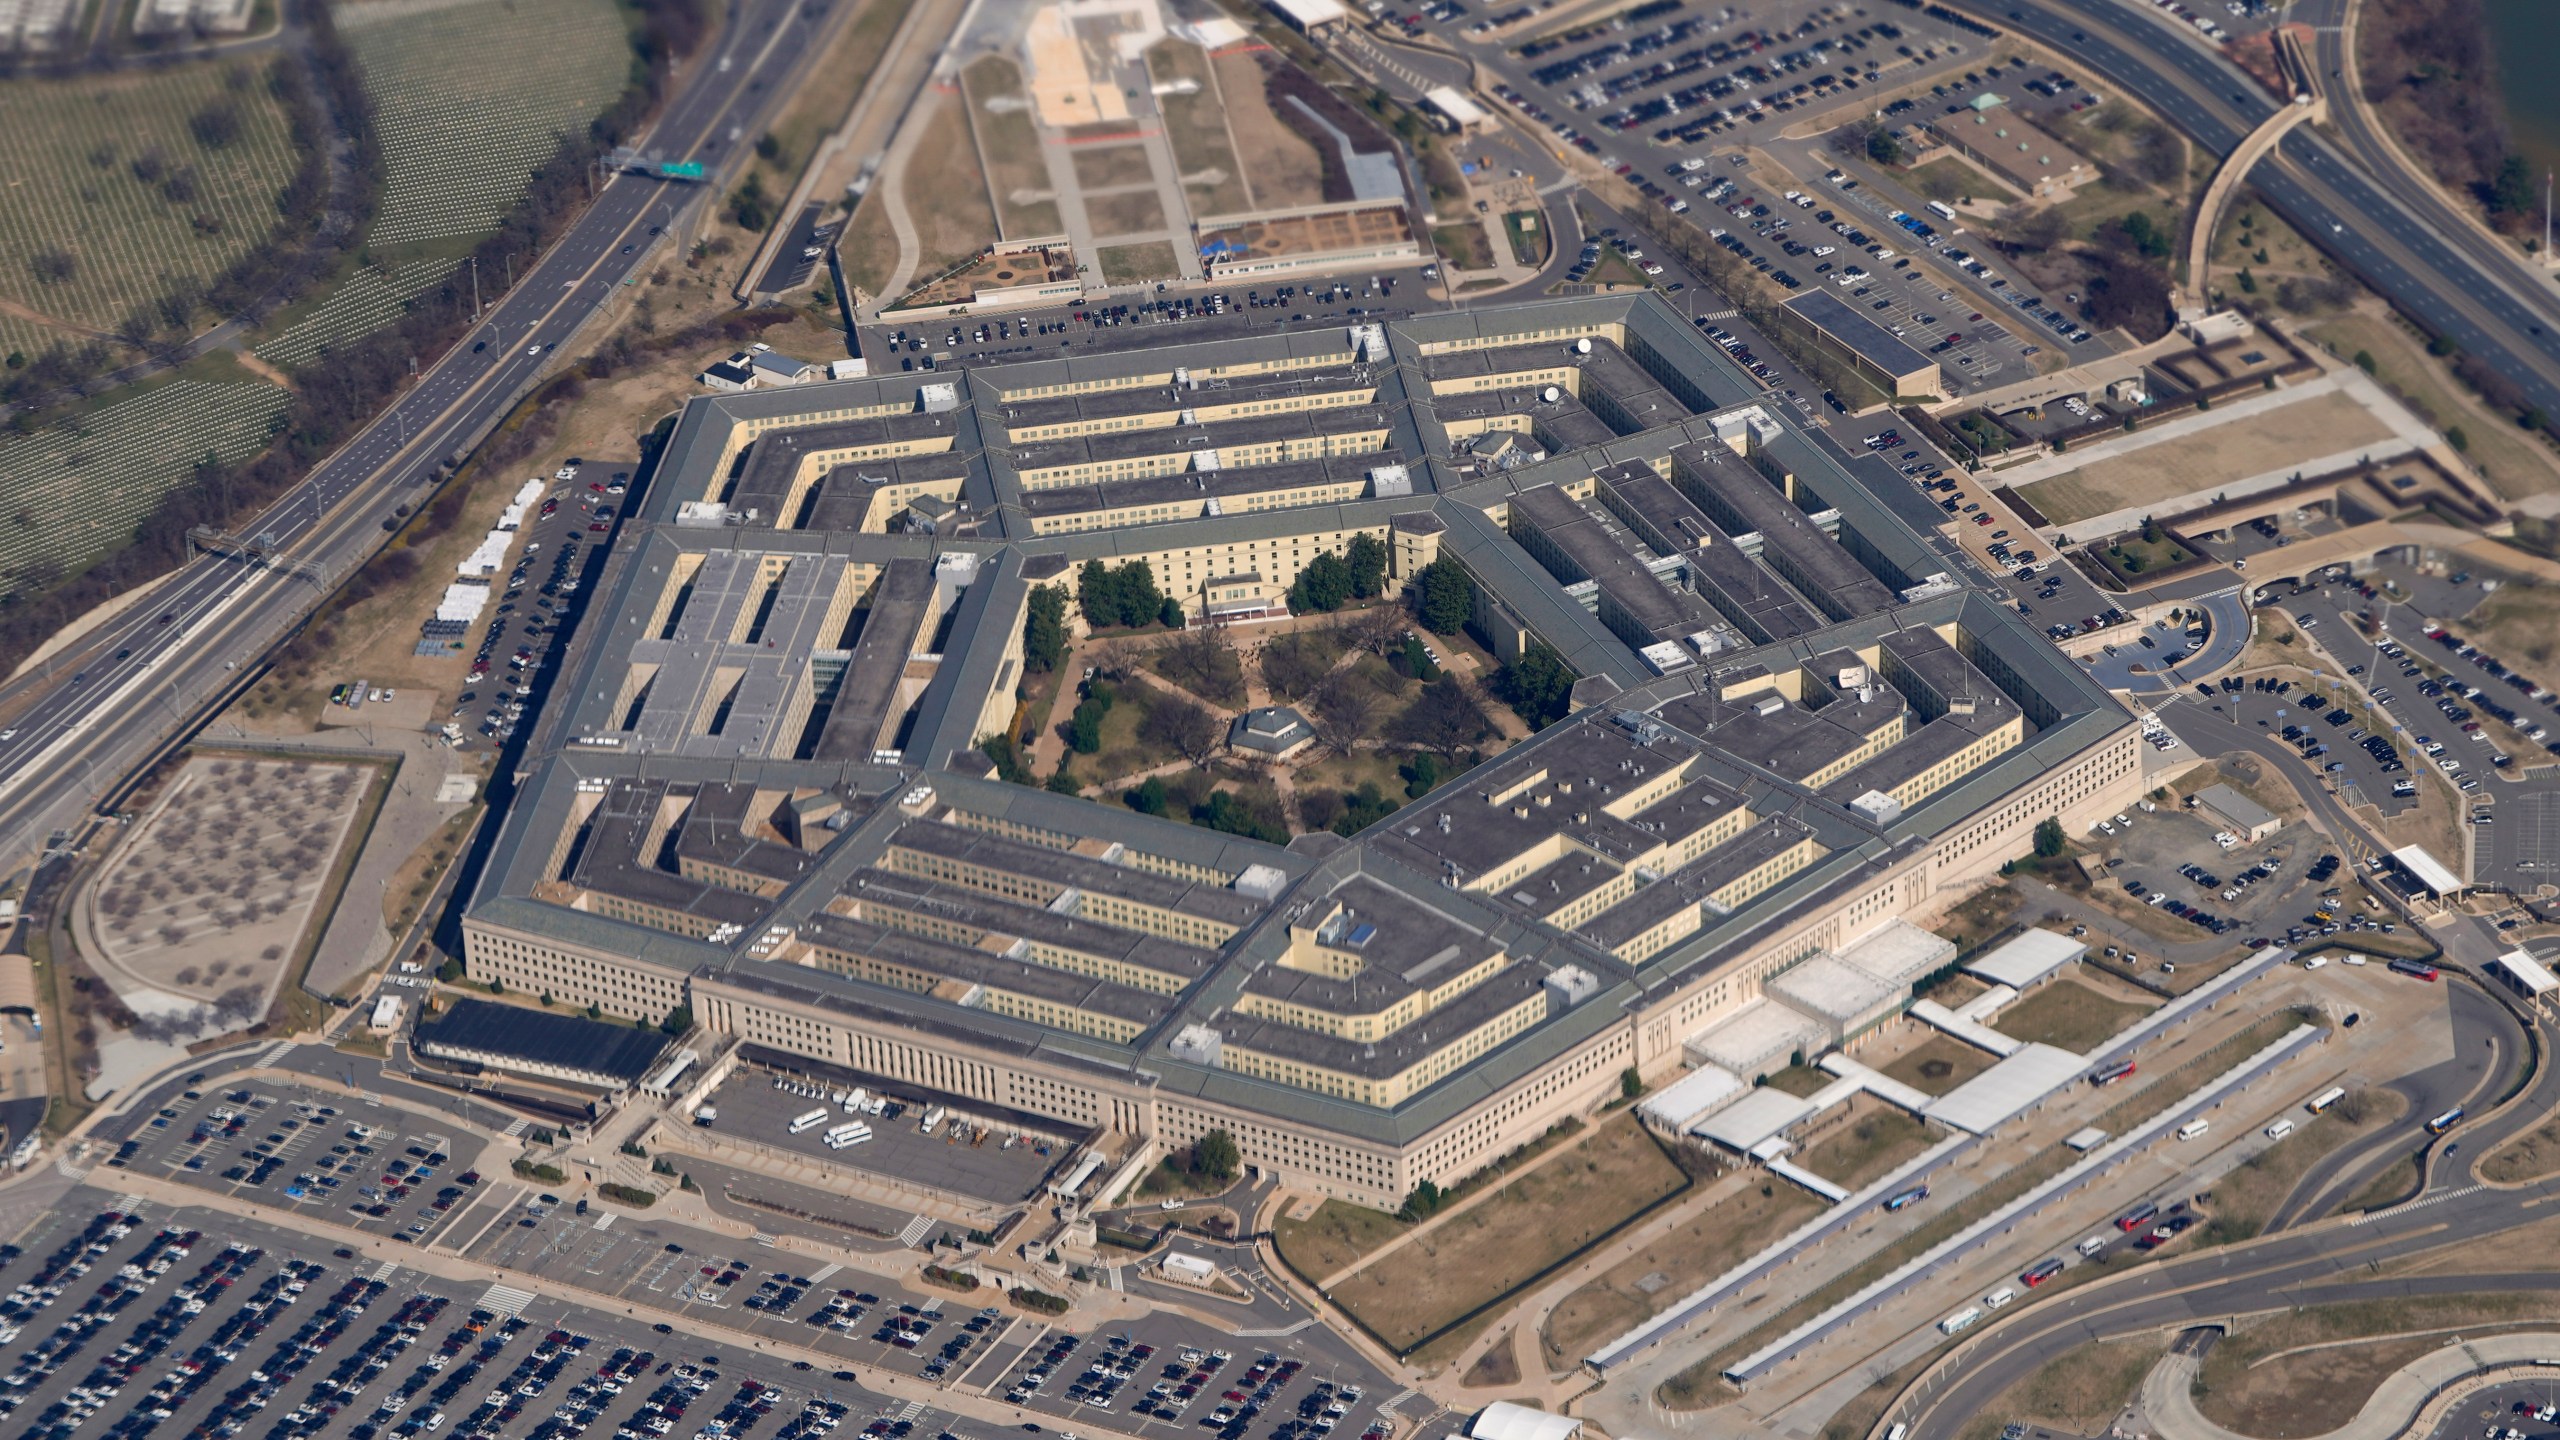 FILE - The Pentagon is seen from Air Force One as it flies over Washington, March 2, 2022. A new Pentagon study that examined reported sightings of UFOs over nearly the last century has found no evidence of aliens or extraterrestrial intelligence. That conclusion is consistent with past U.S. government efforts to assess the accuracy of claims that have captivated public attention for decades. (AP Photo/Patrick Semansky, File)